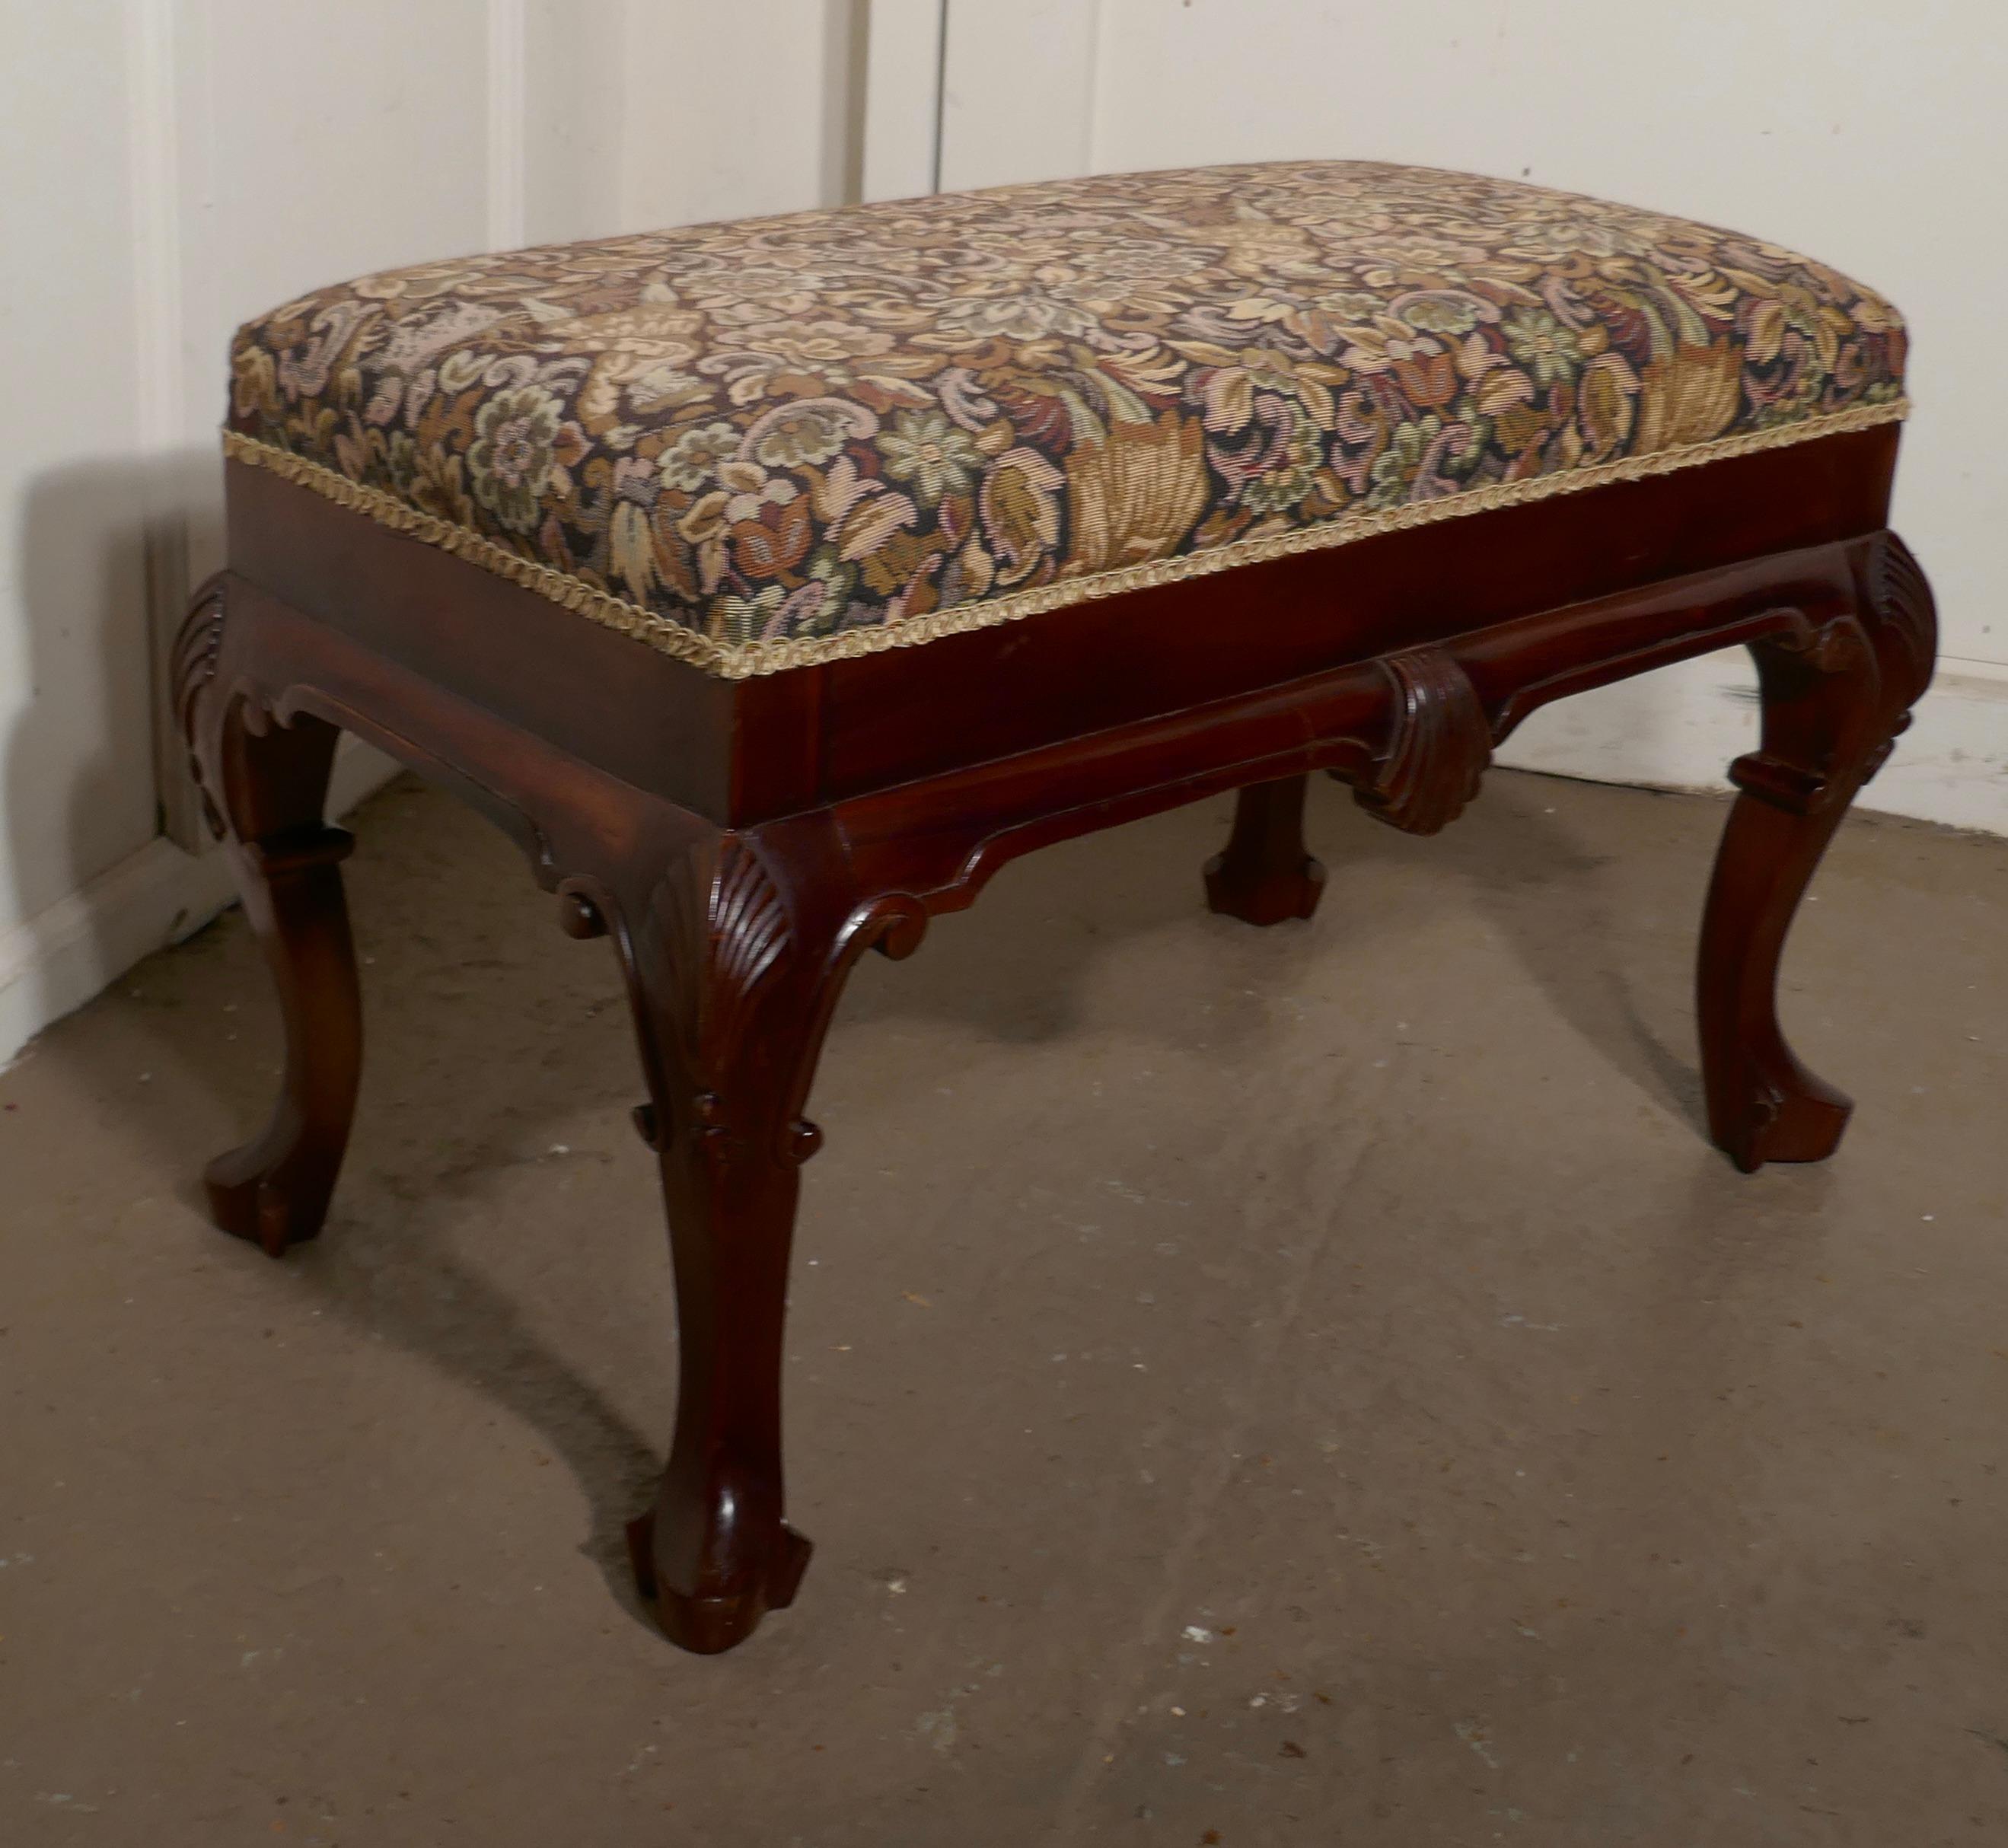 rts & Crafts tapestry upholstered mahogany stool

A lovely piece, made in red mahogany, it stands on decorative carved Cabriole legs and the deep seat is upholstered in a Arts & Crafts design hunting print fabric with faded black background
The